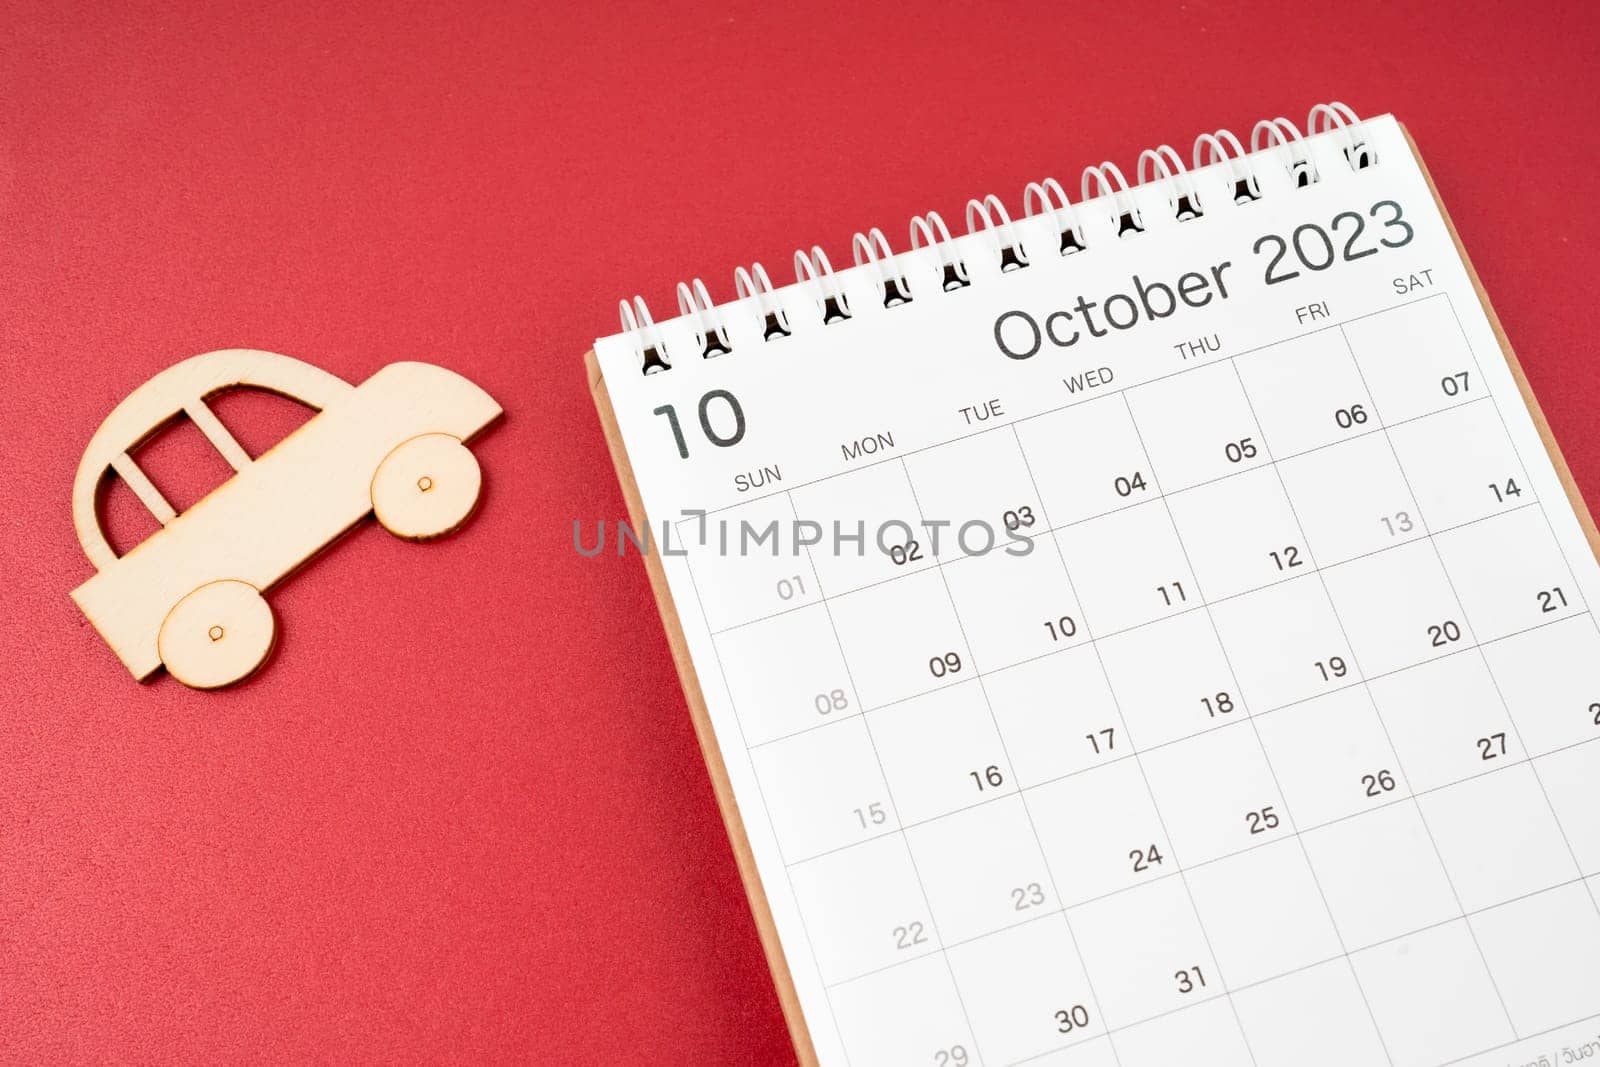 The October 2023 desk calendar and wooden toy cars on red background. by Gamjai